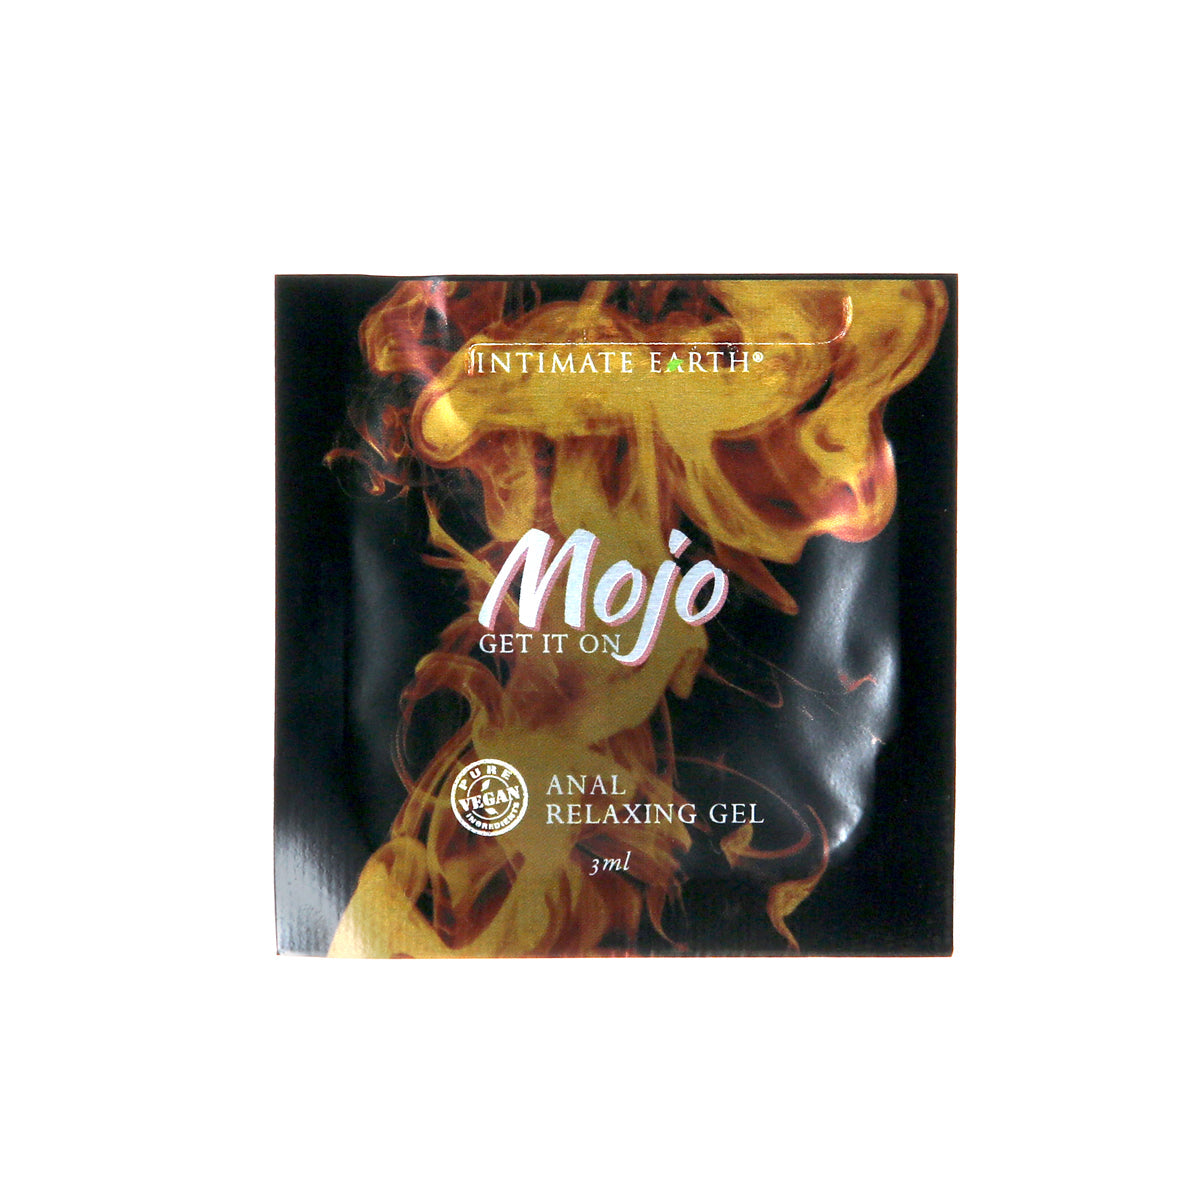 Mojo Clove Oil Anal Relaxing Gel - Thorn & Feather Sex Toy Canada